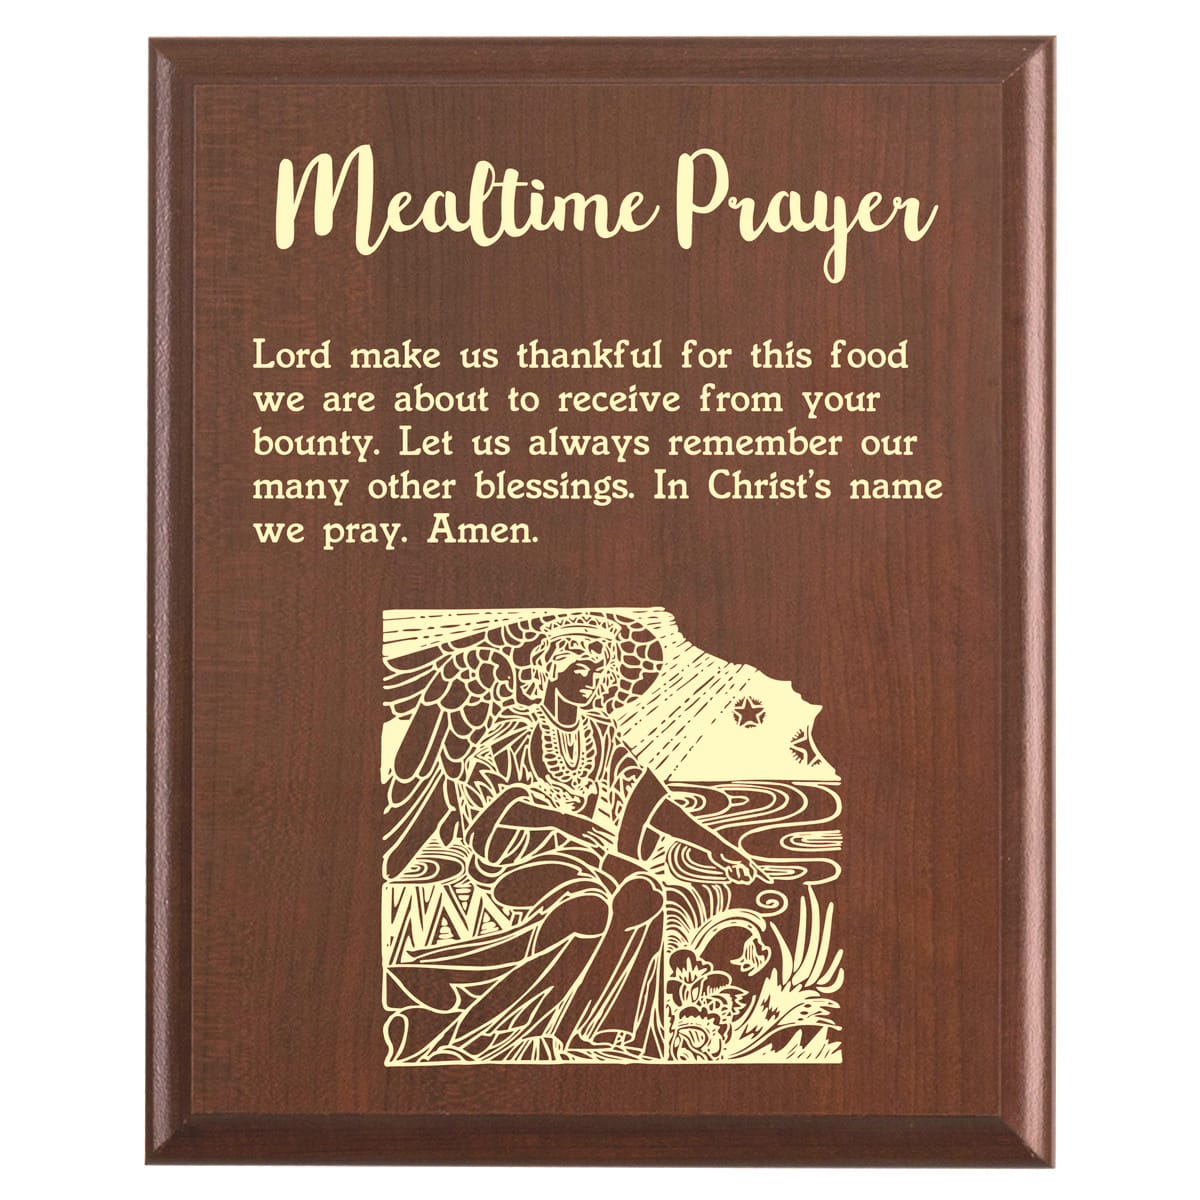 Plaque photo: Mealtime Prayer Plaque design with free personalization. Wood style finish with customized text.